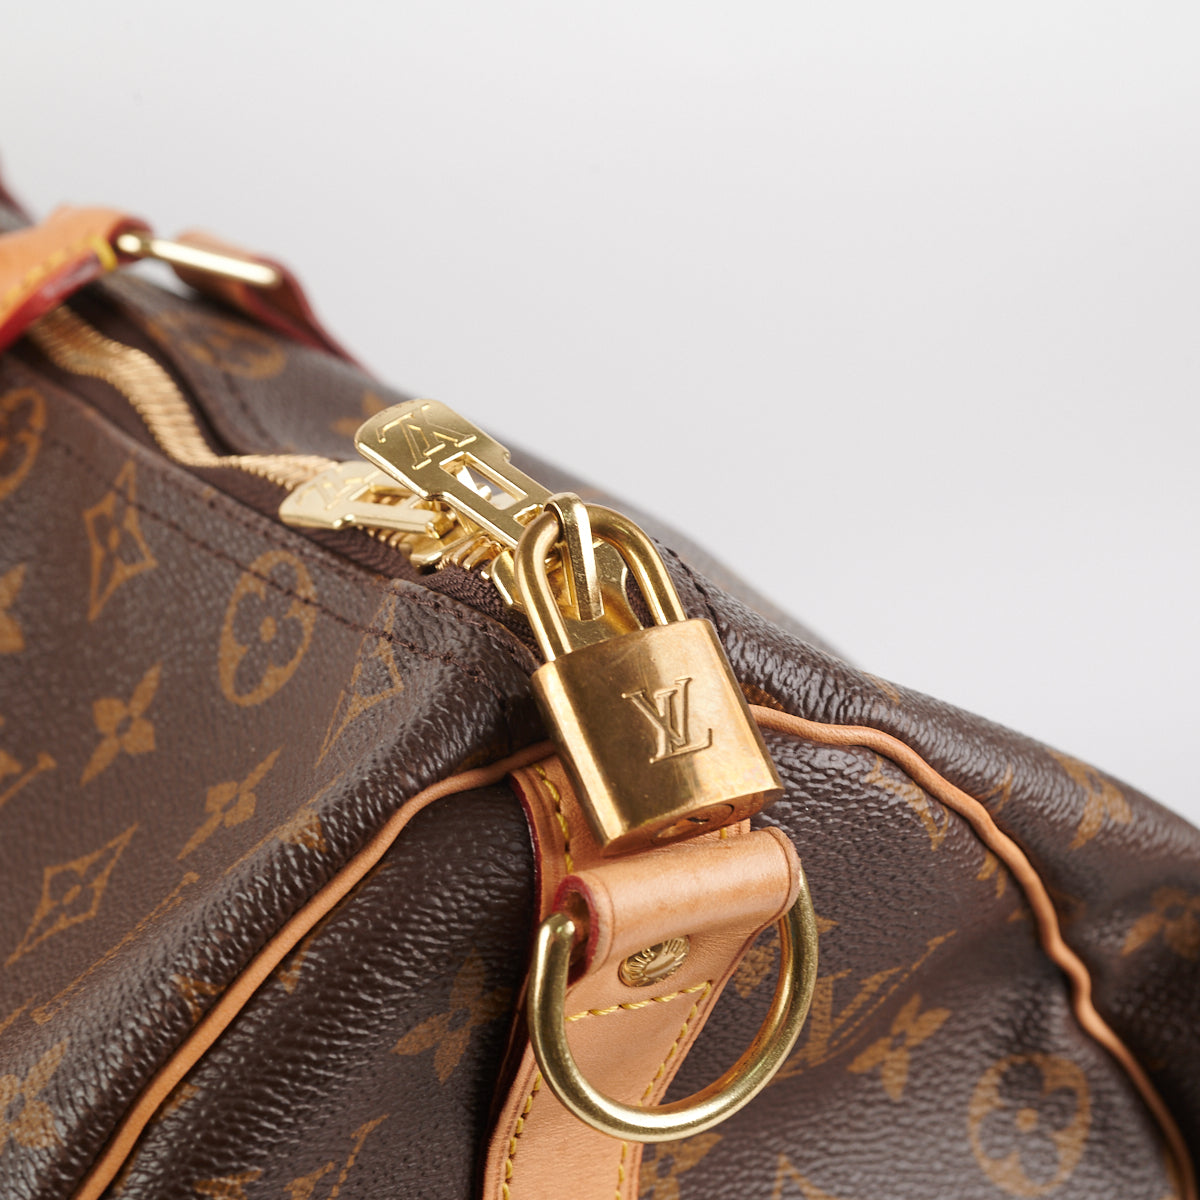 Shop Louis Vuitton Keepall bandoulière 45 (M40569) by えぷた